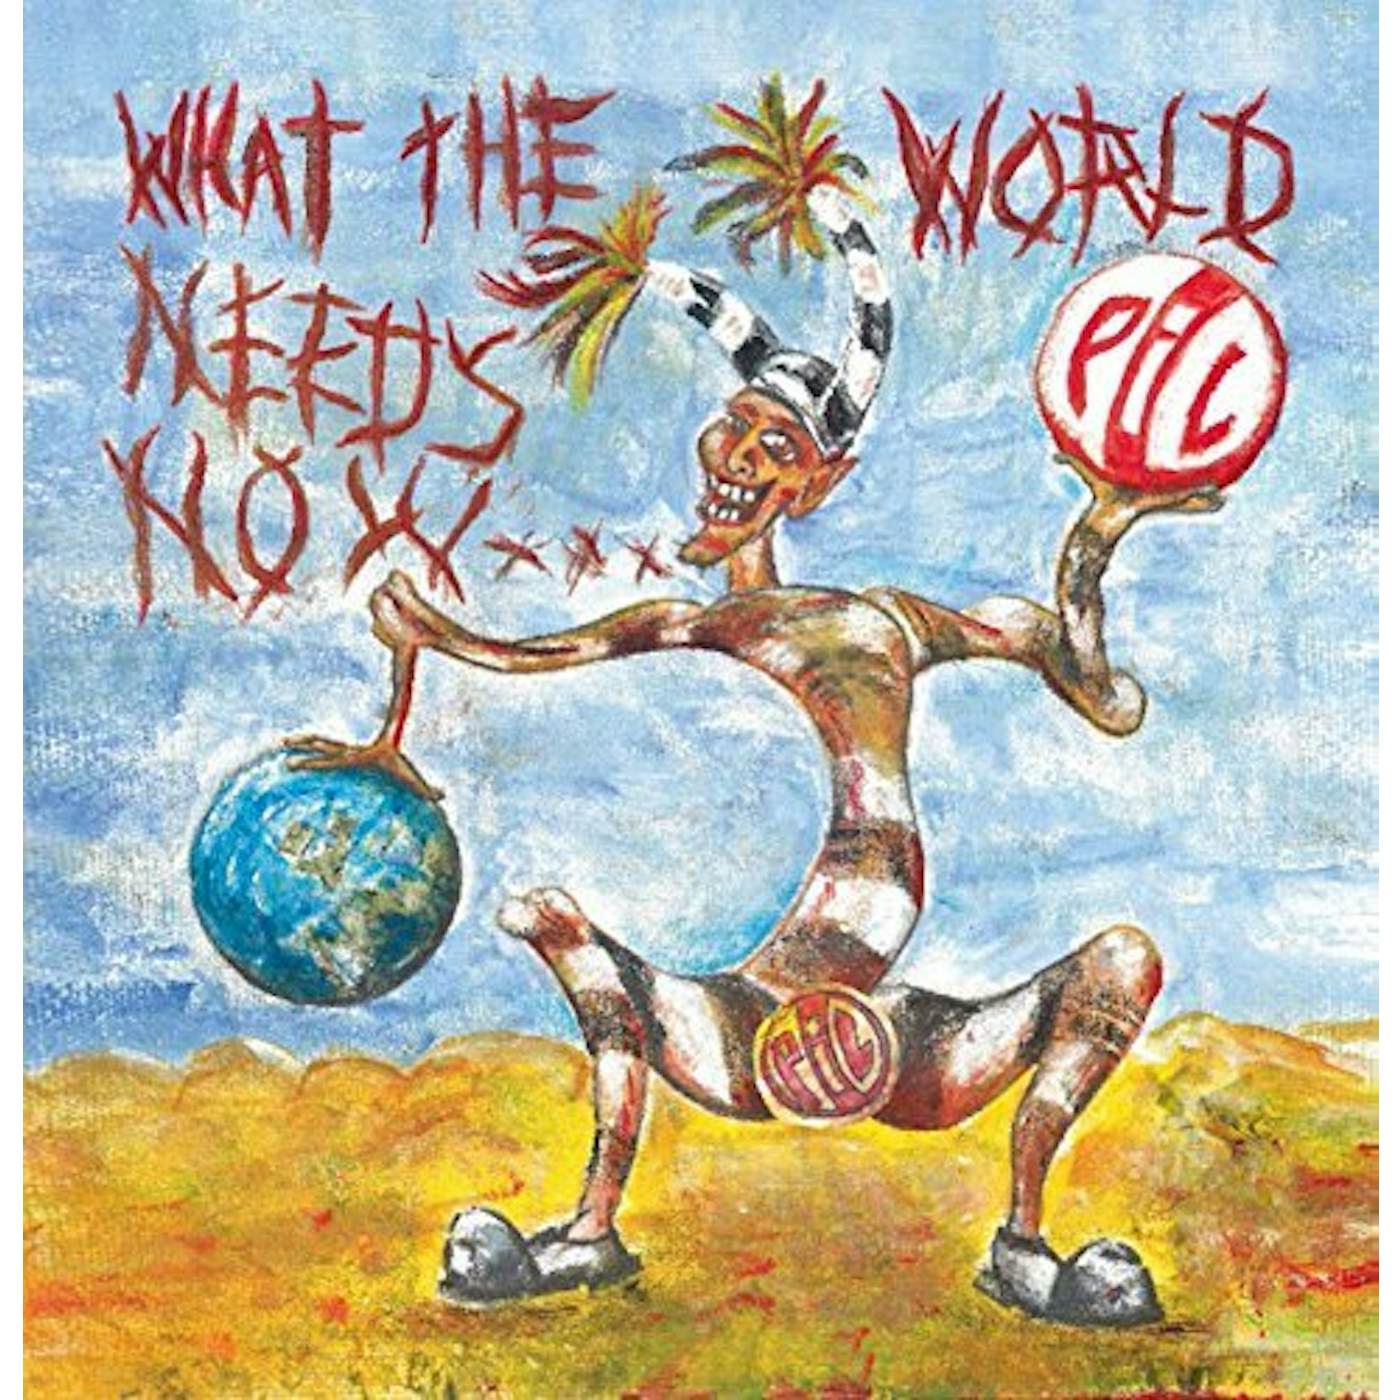 Public Image Ltd. WHAT THE WORLD NEEDS NOW CD